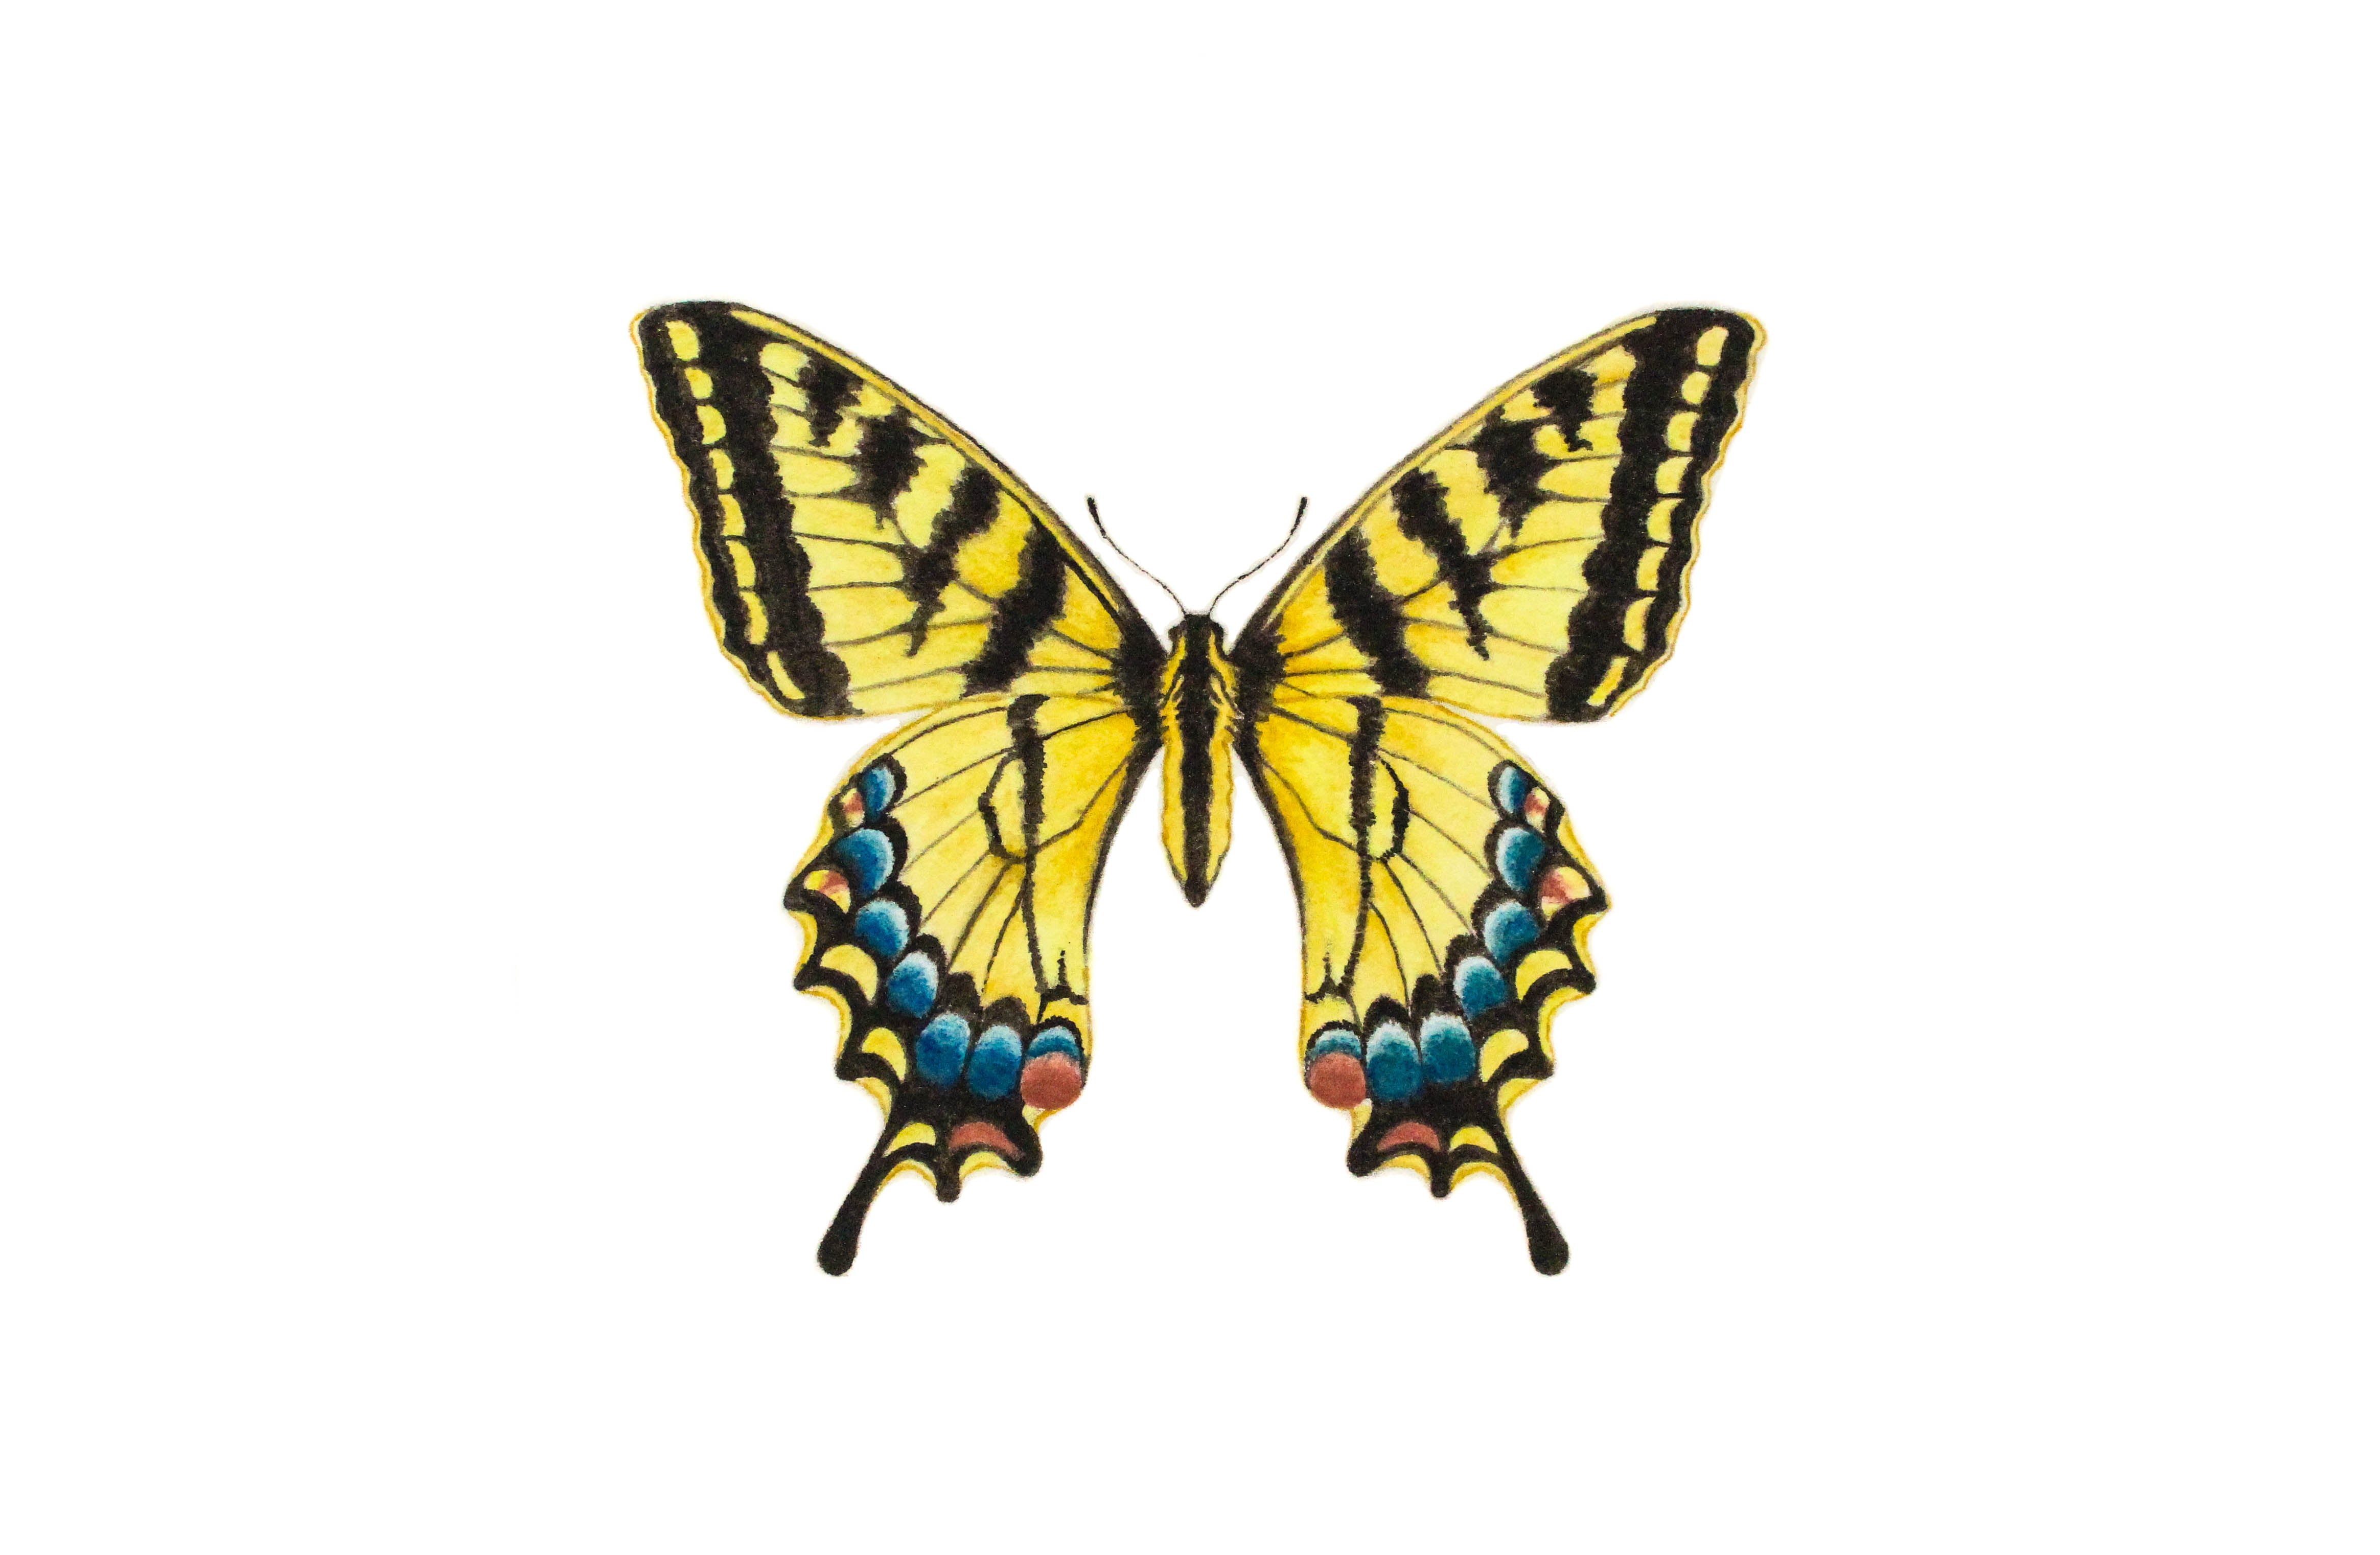 New Pigment Free Paint is Inspired by Butterflies